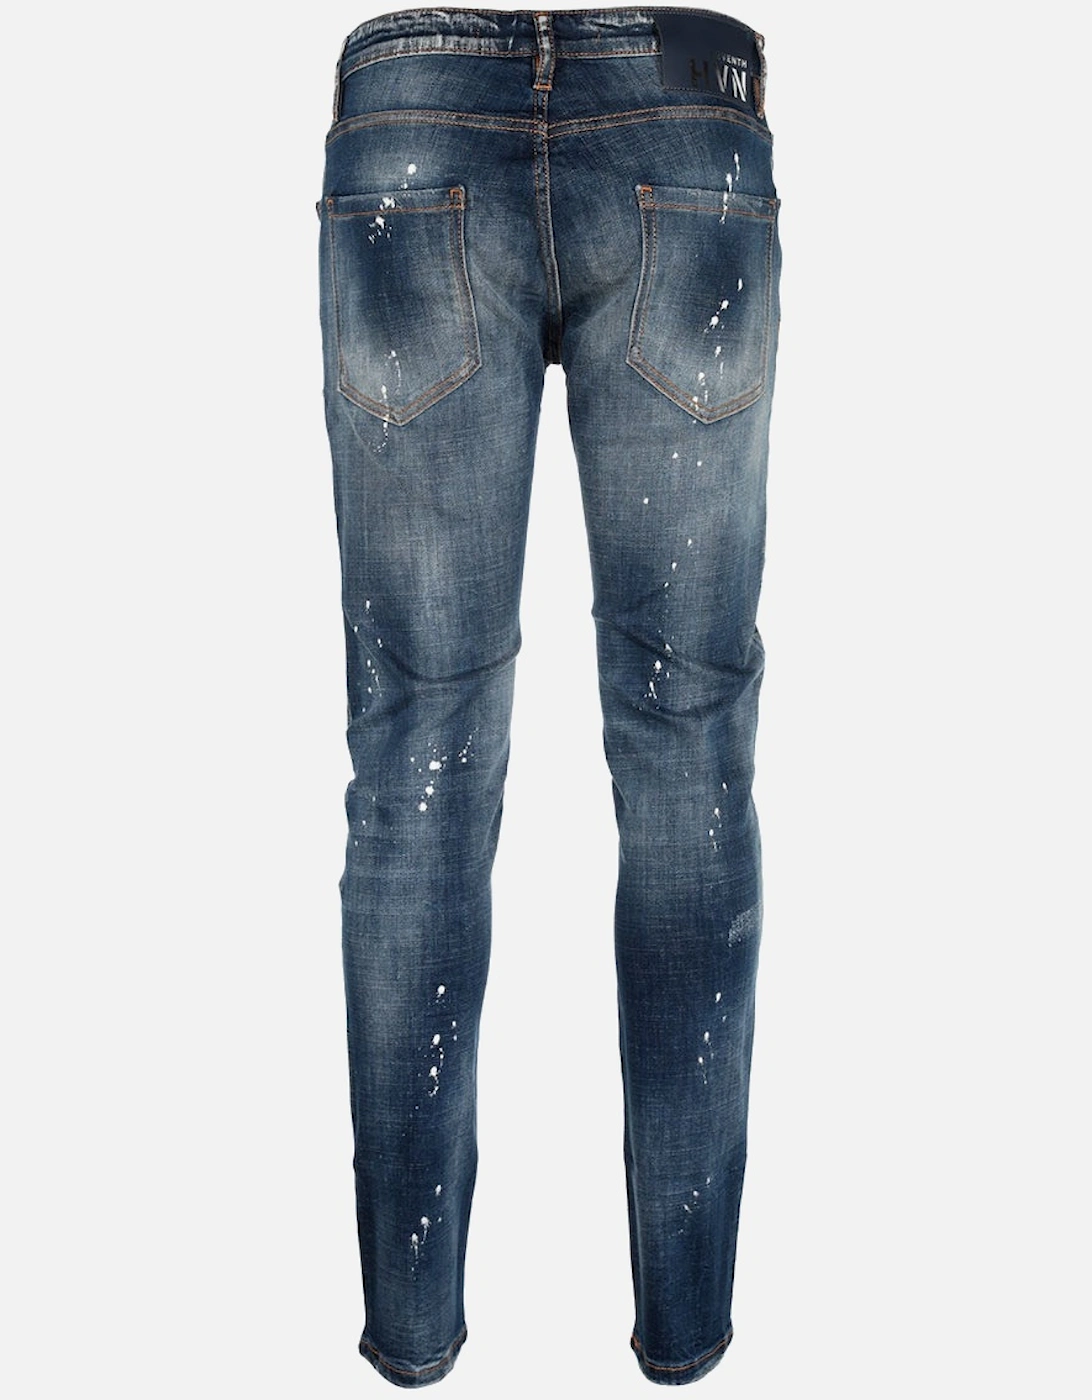 Fly Rider Distressed Jeans Stonewash